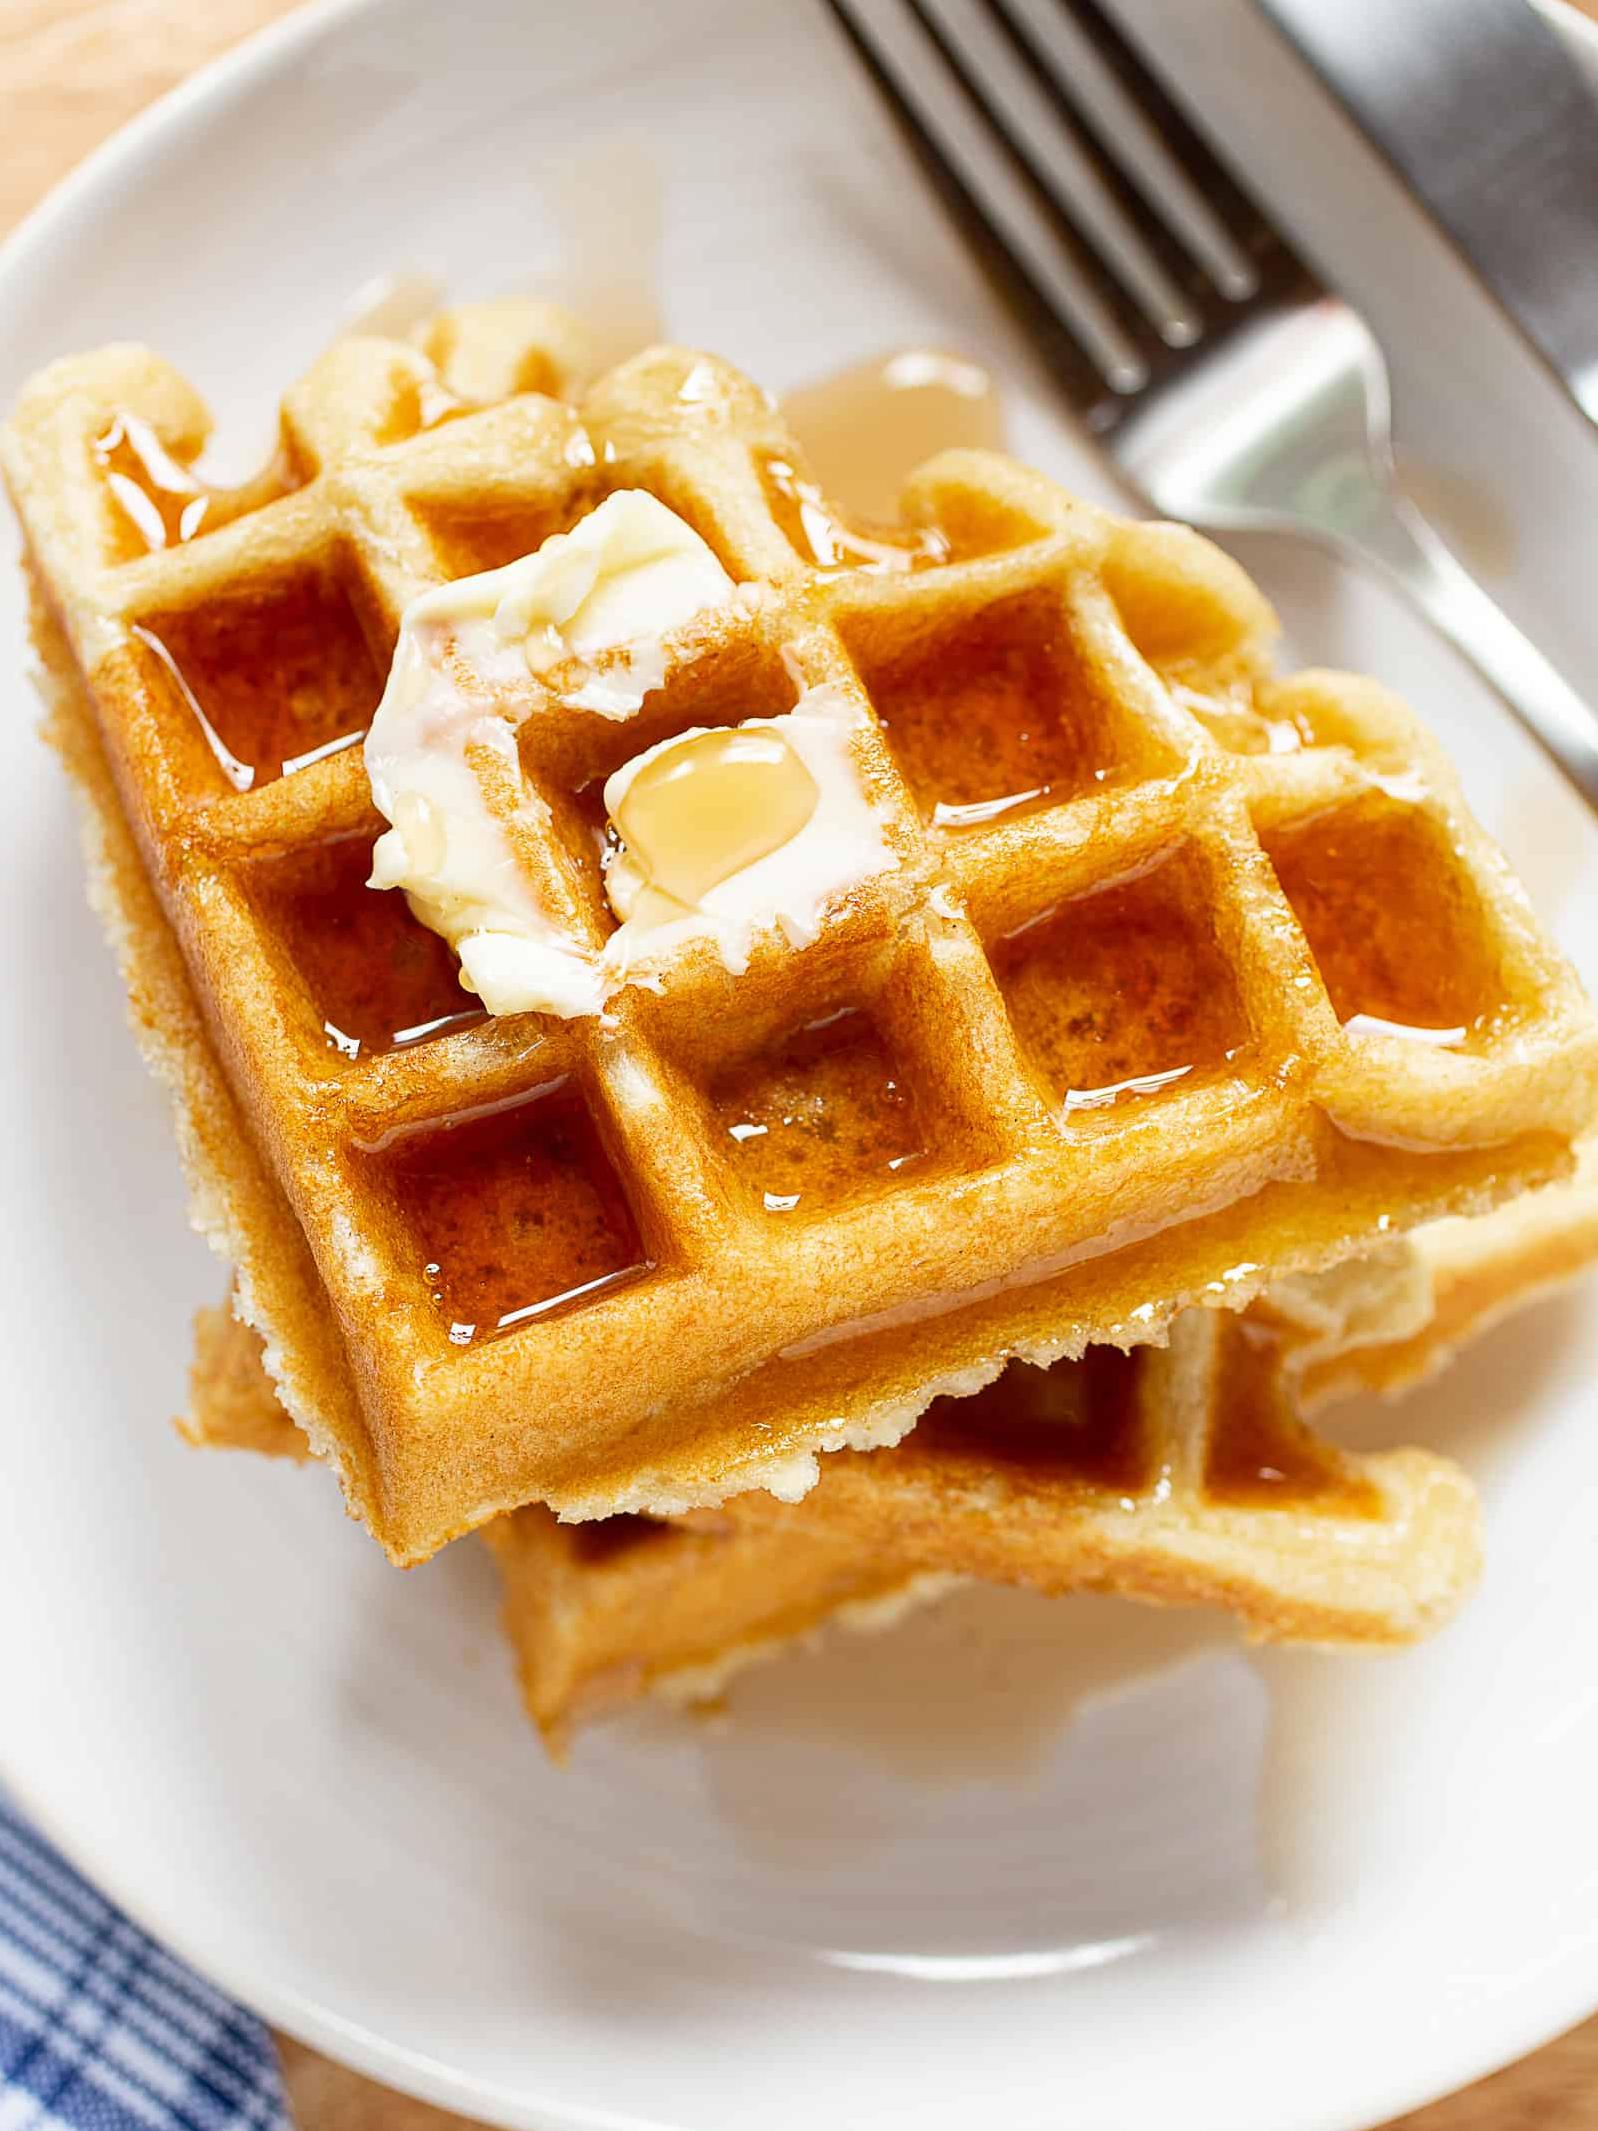  Who can resist a stack of fresh, warm waffles?